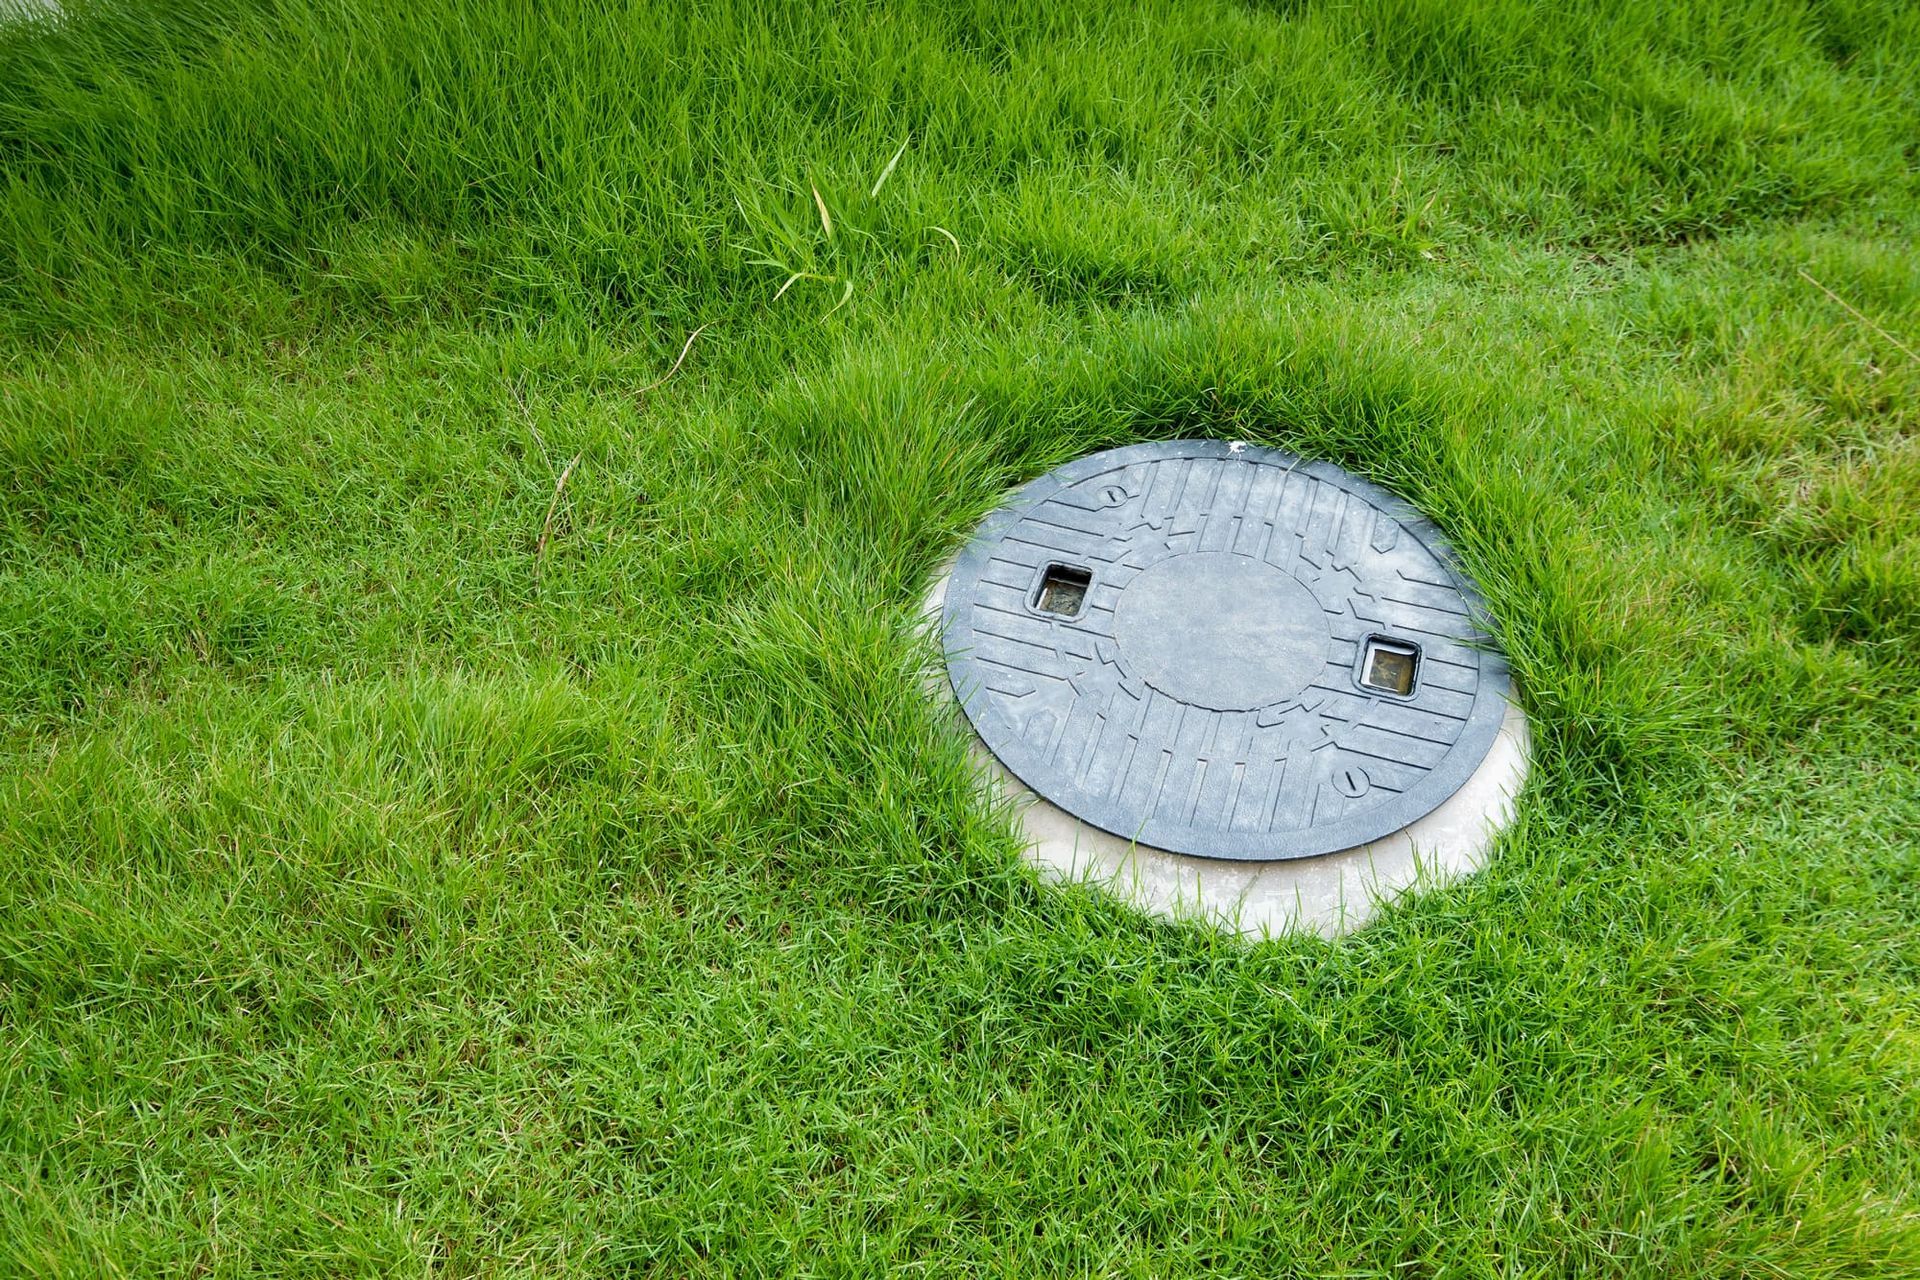 most septic tanks can be identified by locating the cover